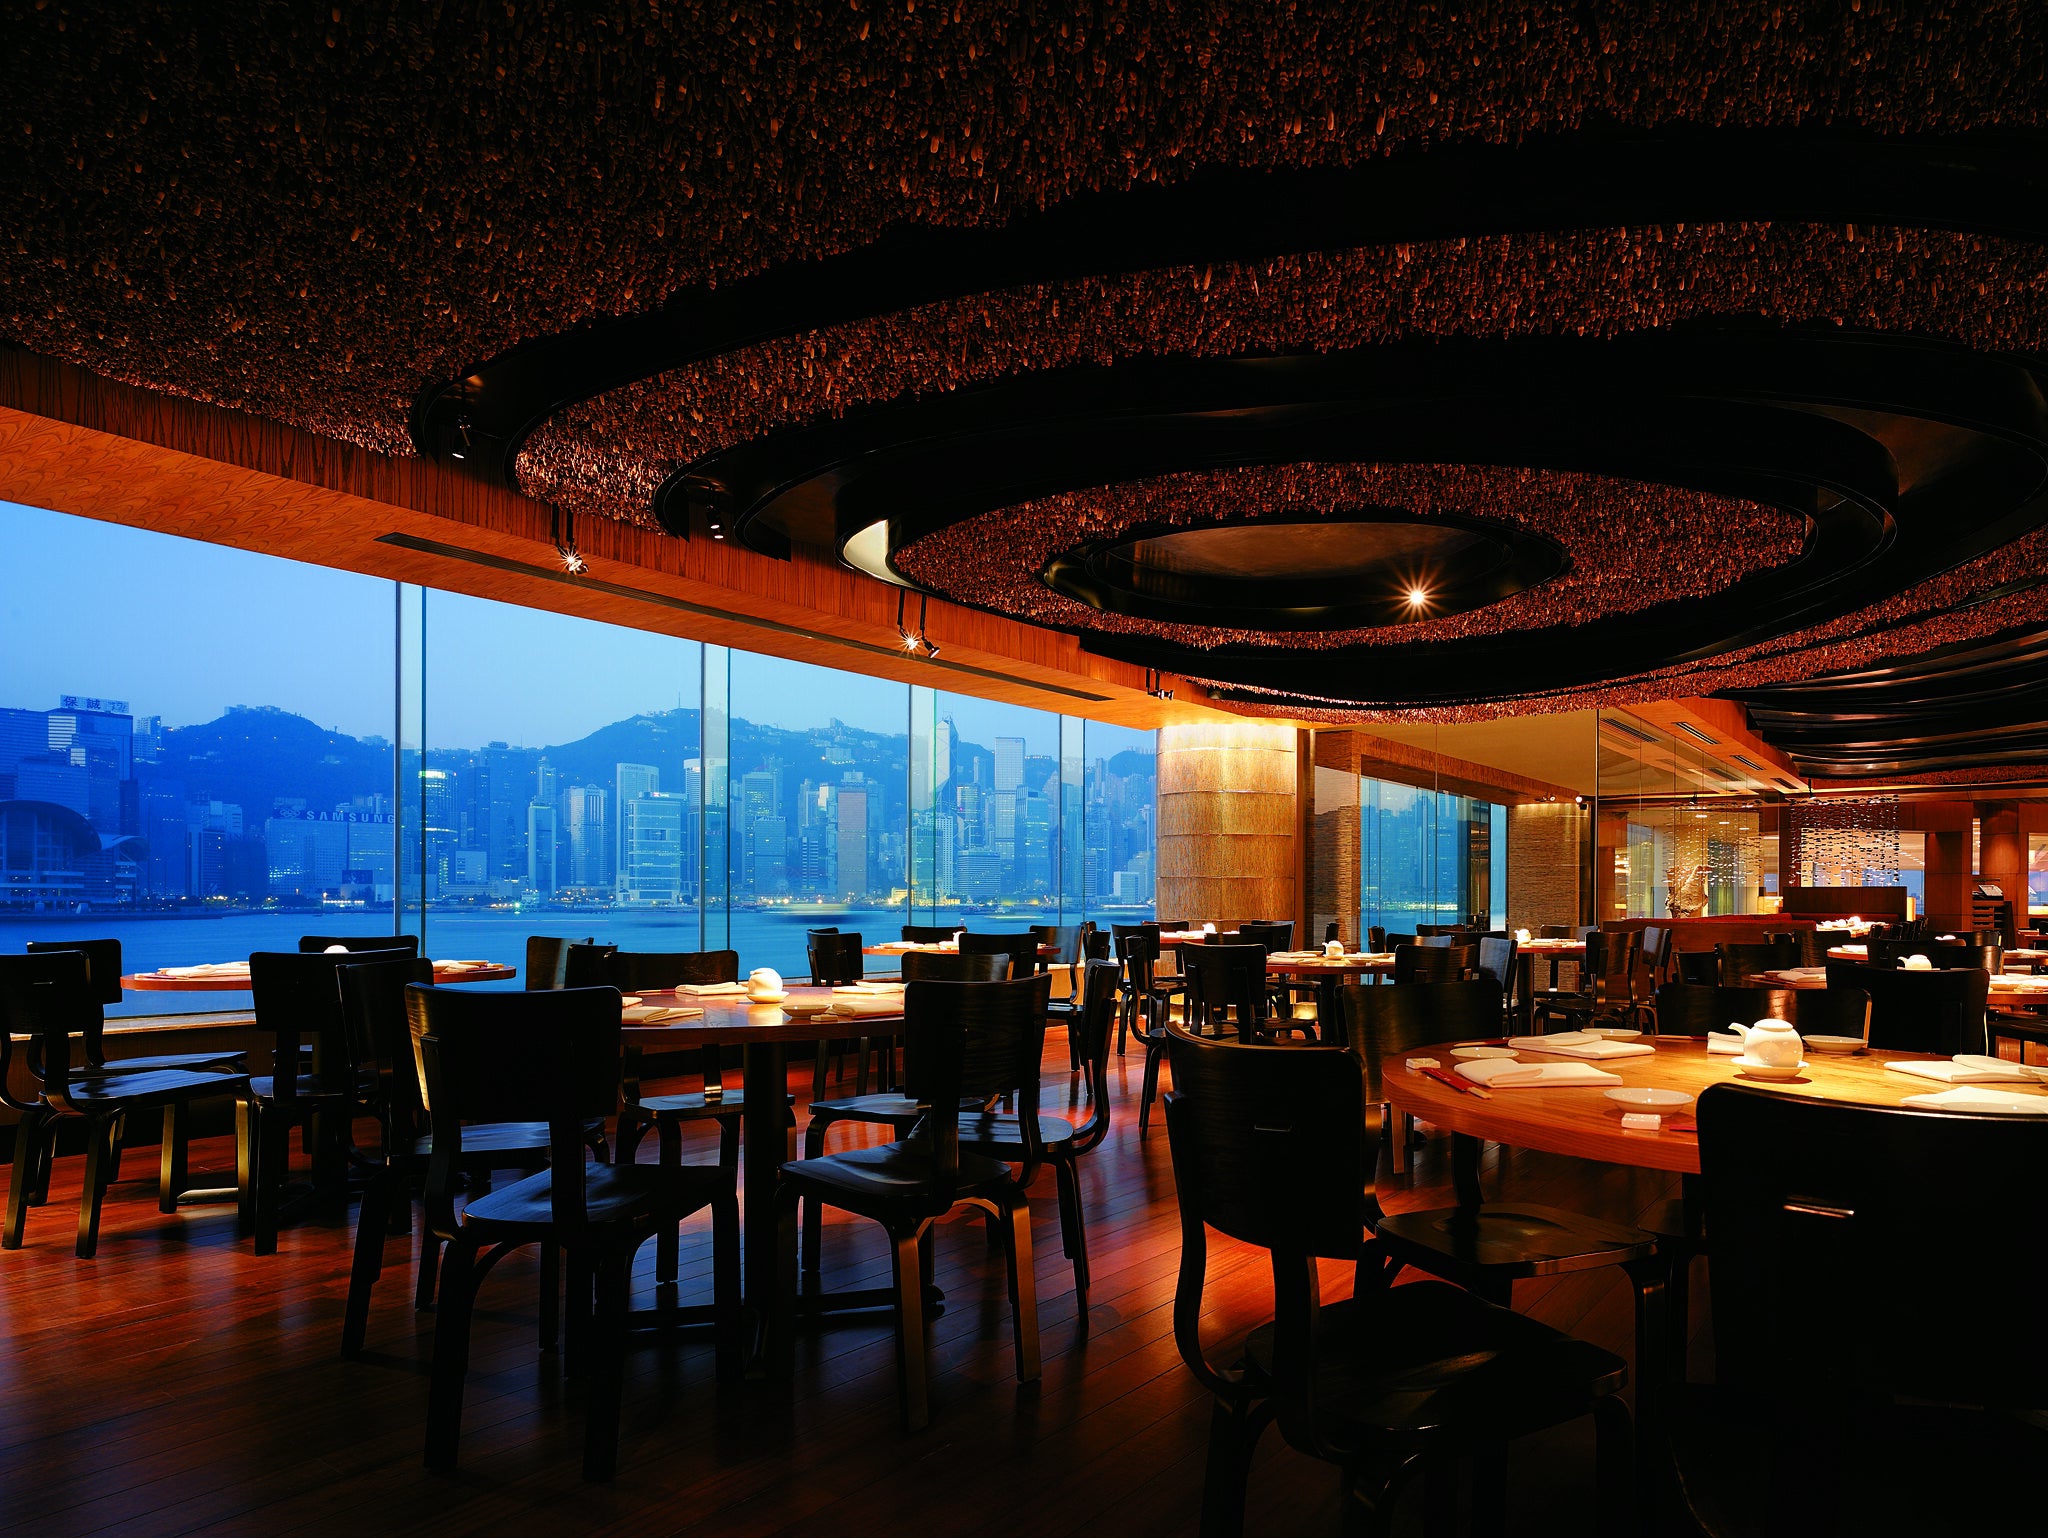 The interior of NOBU restaurant at InterContinental Hong Kong: complete with Victoria Harbour views